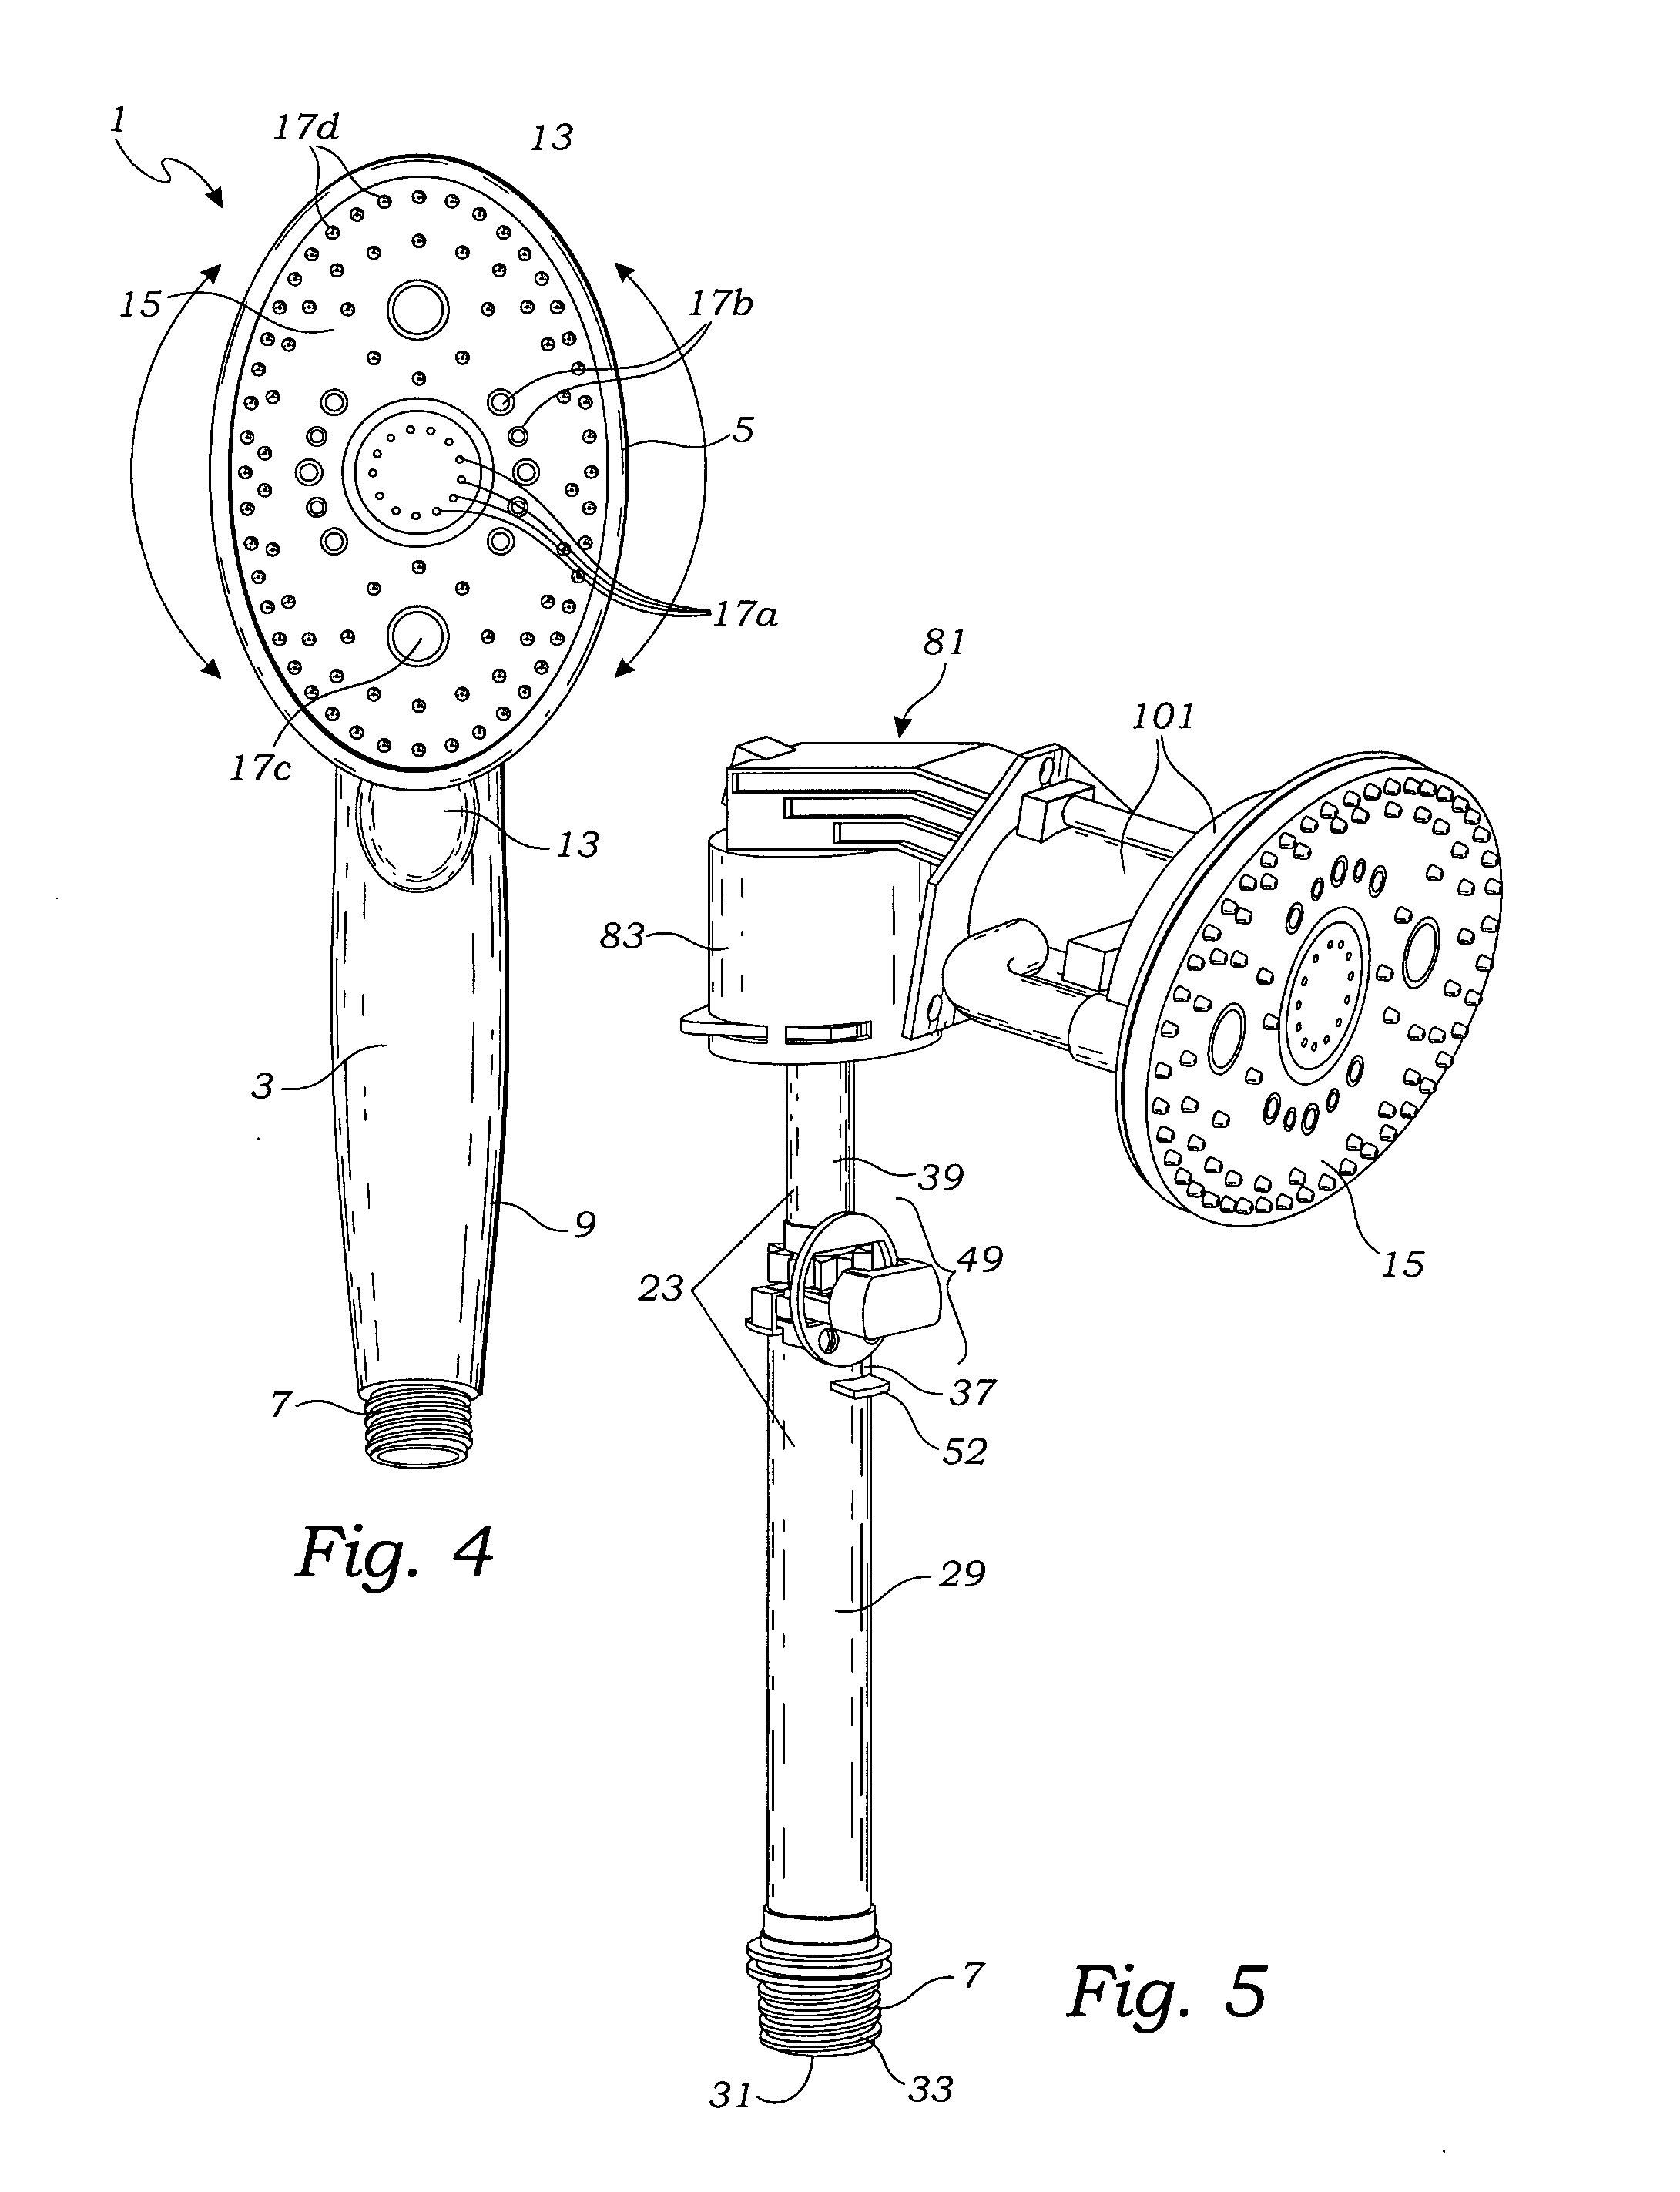 Showerhead with rotatable oval spray pattern and handheld spray pattern controller